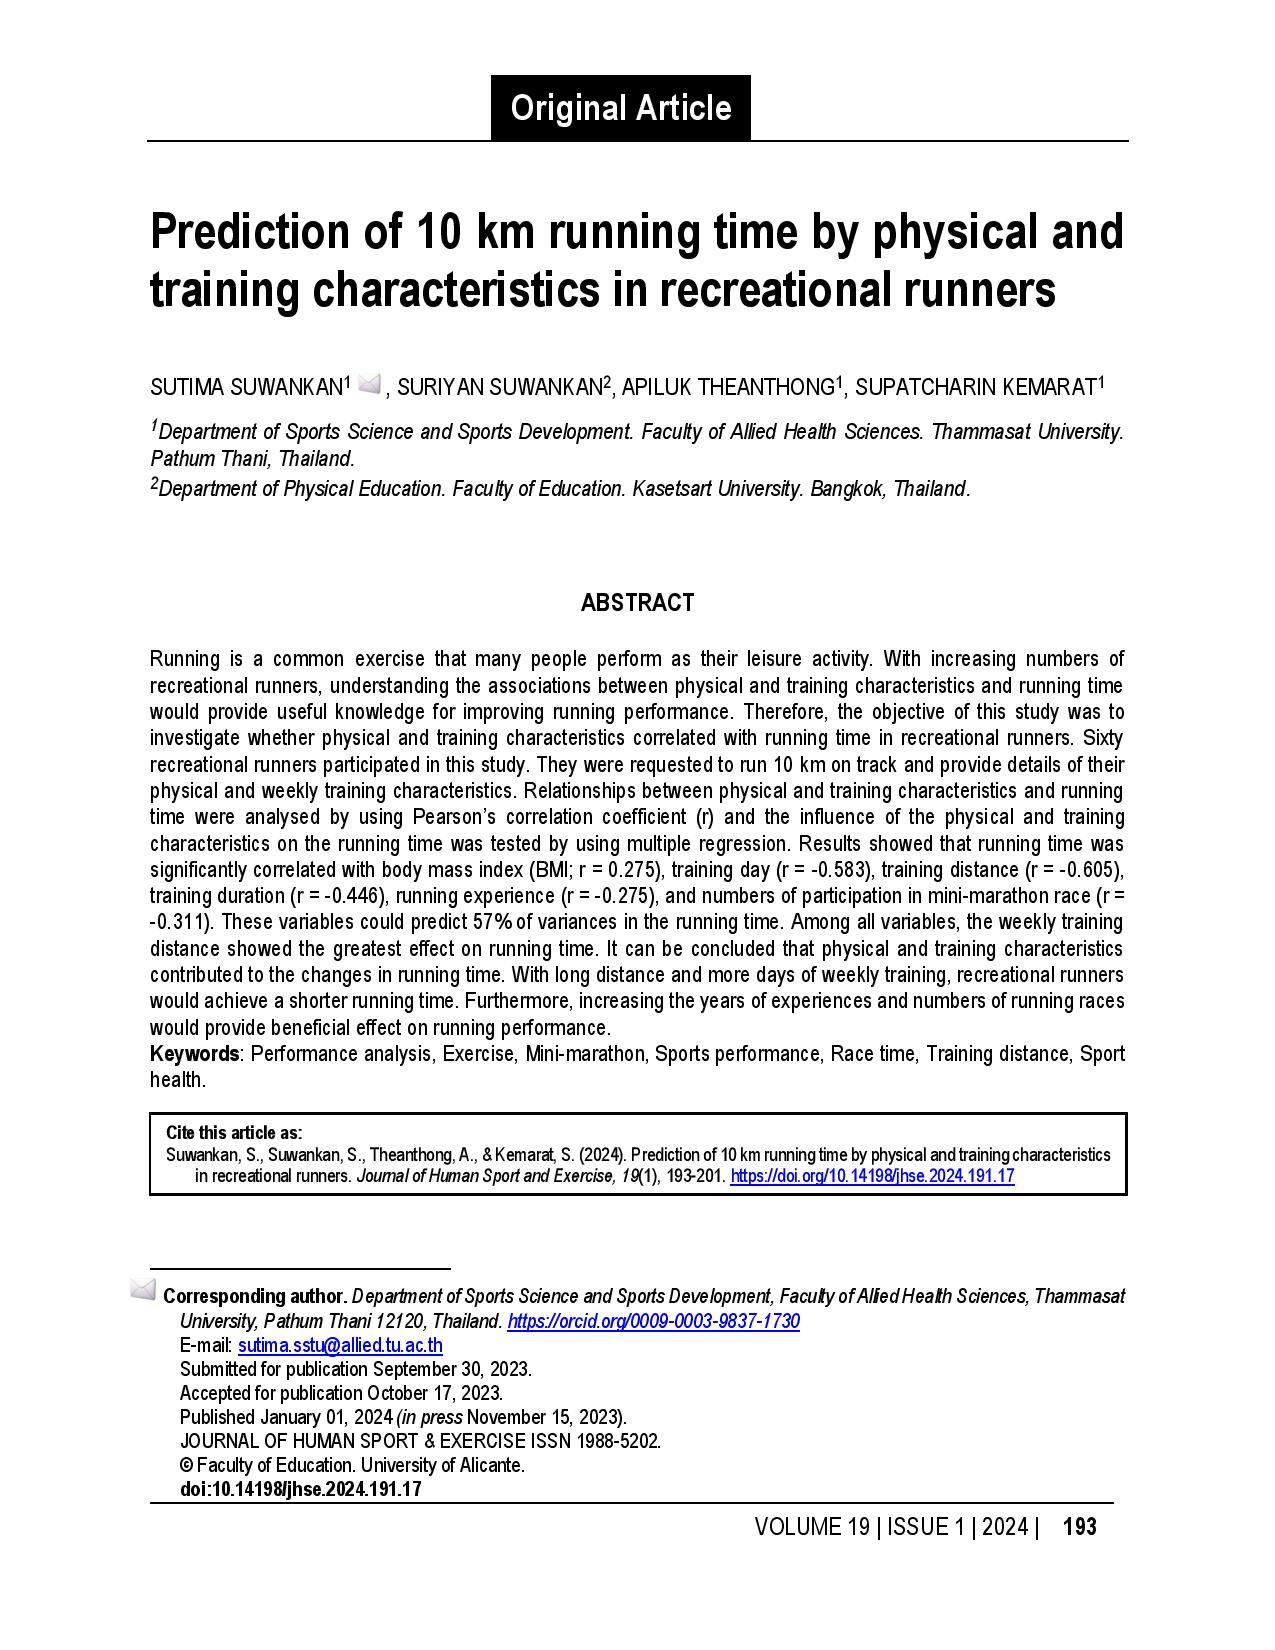 Prediction of 10 km running time by physical and training characteristics in recreational runners